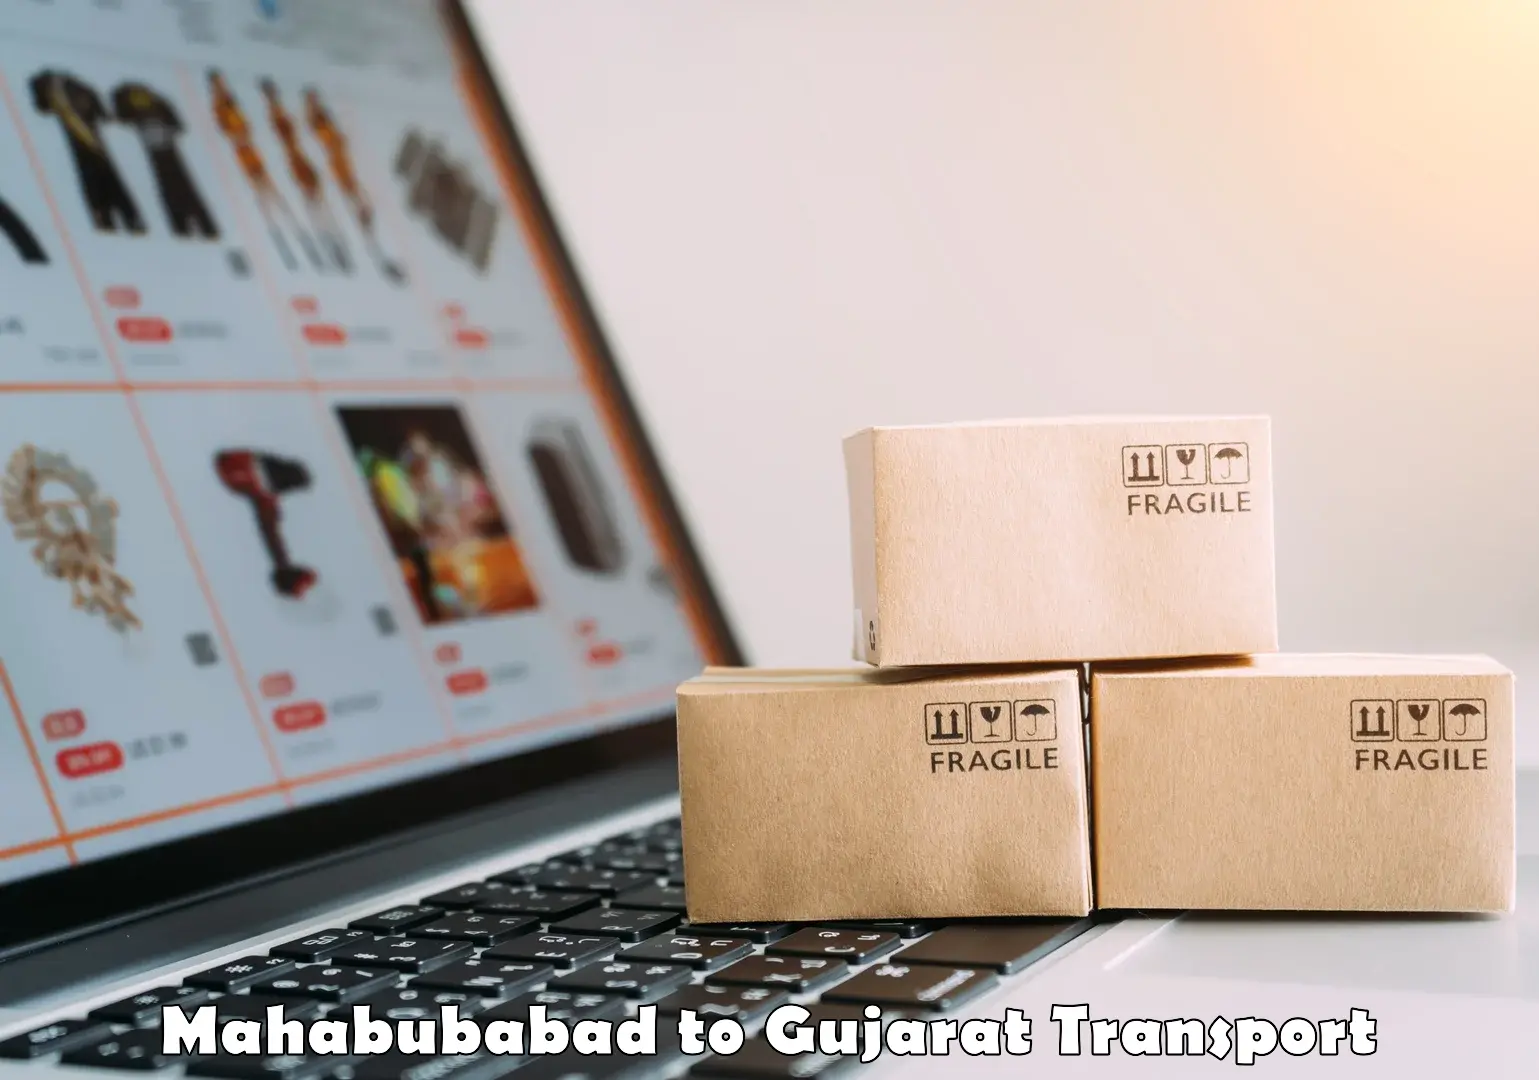 Best transport services in India Mahabubabad to Gujarat